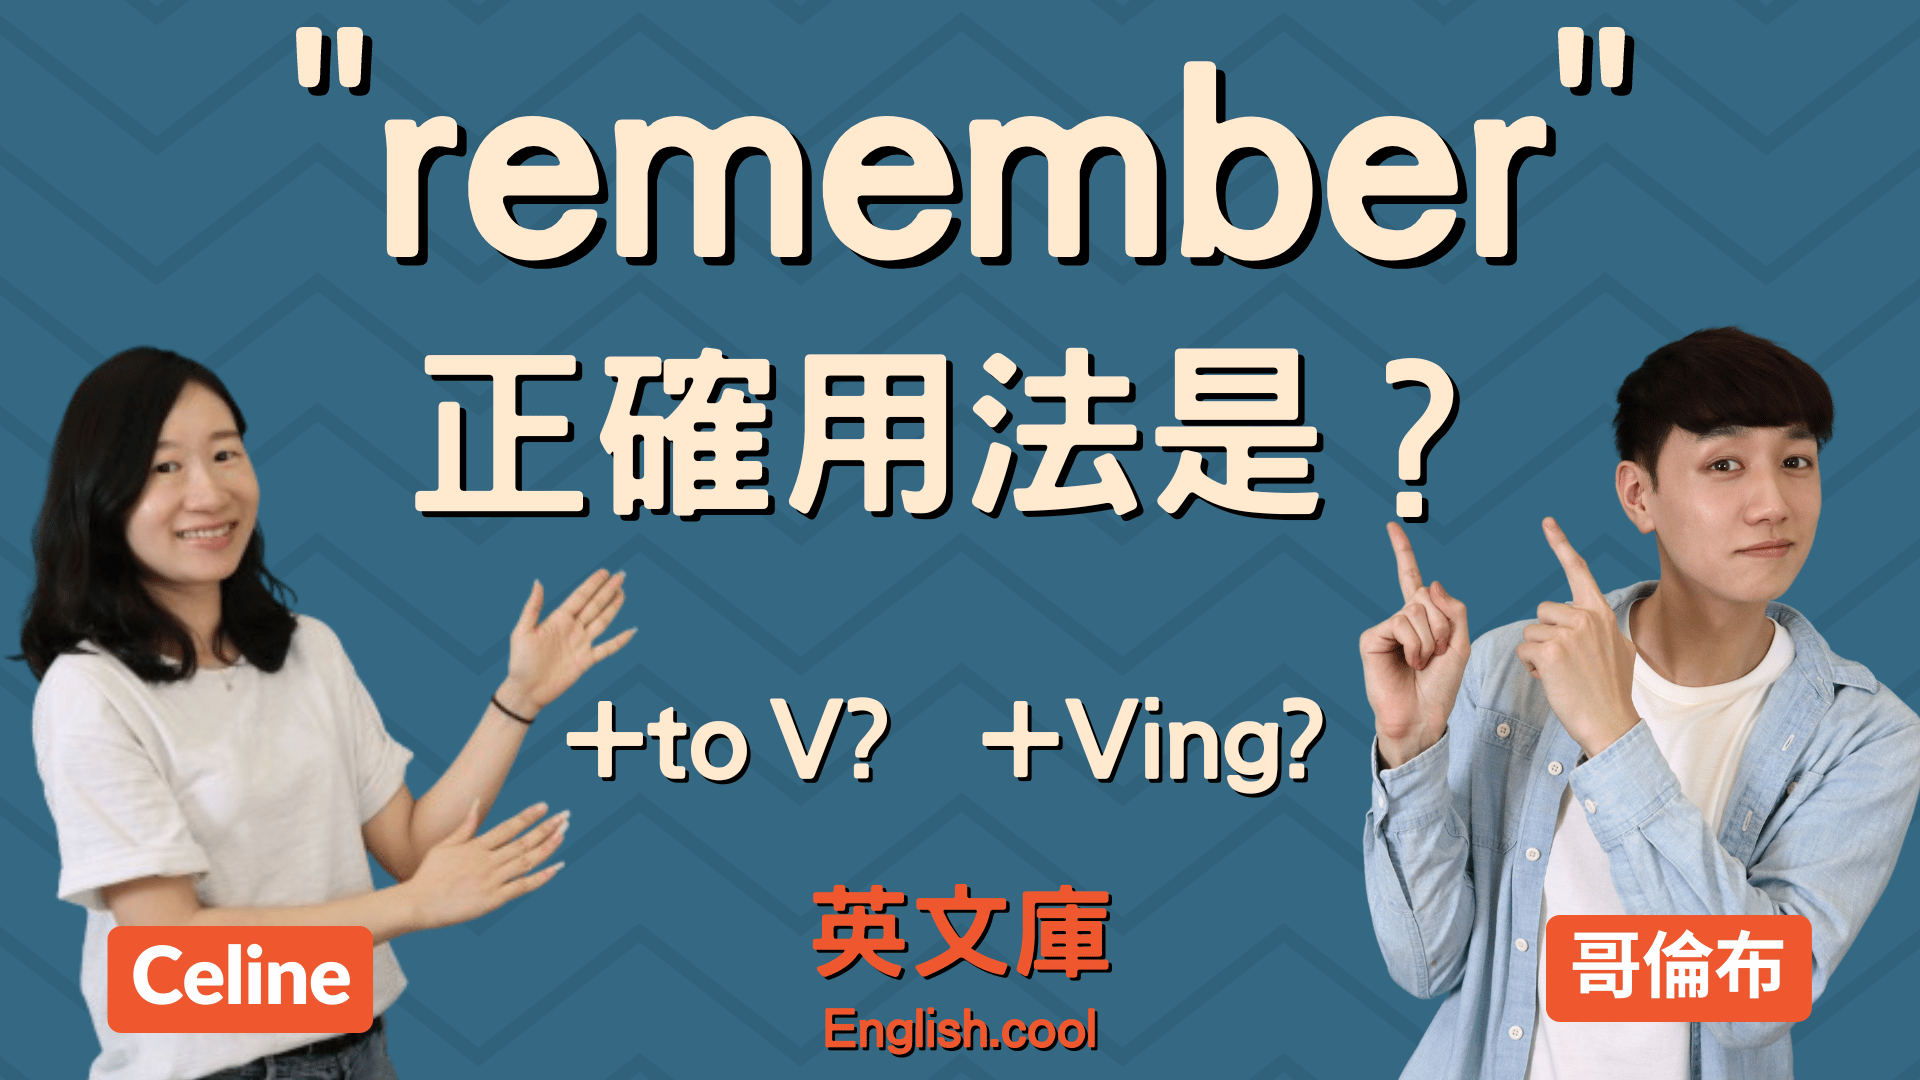 You are currently viewing 「remember」的用法是？後面接 to V 還是 V-ing？